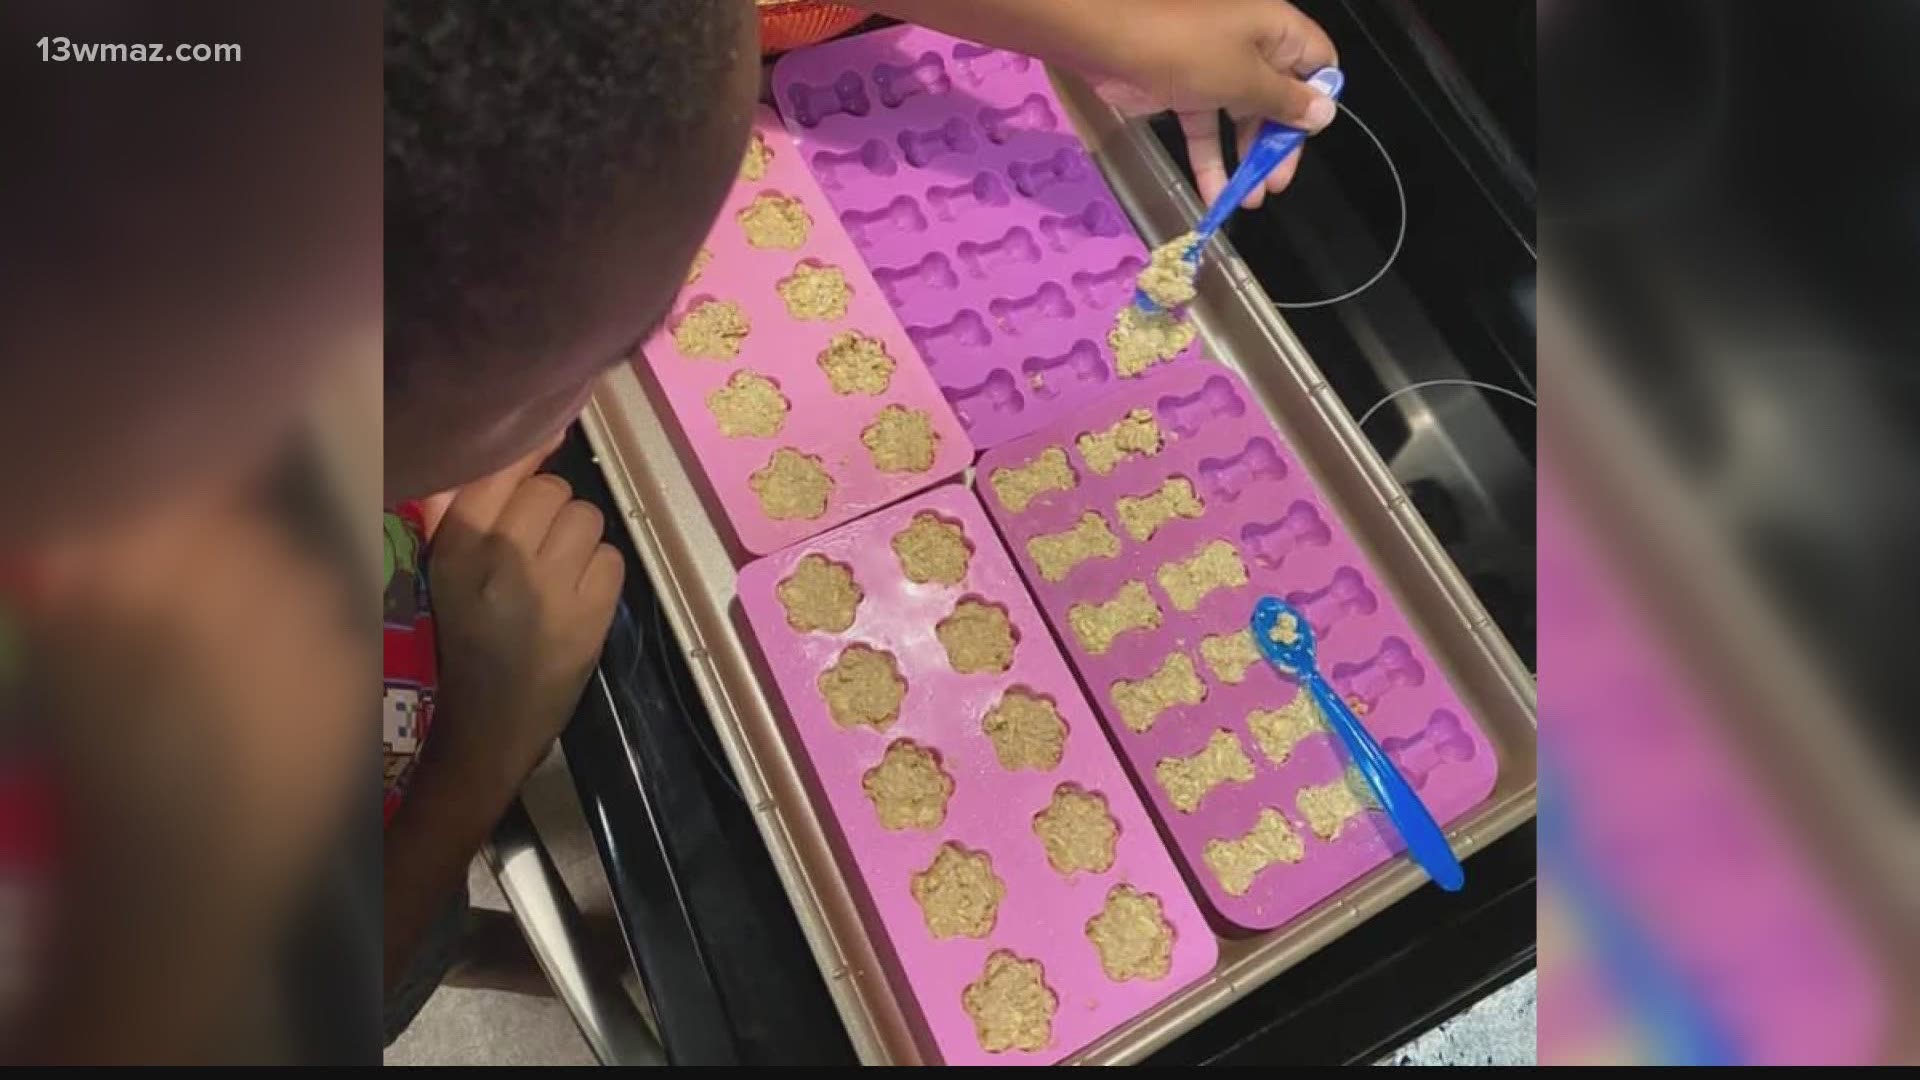 For nearly a month, 8-year-old Landon Hampton has been busy making and selling his homemade dog treats.